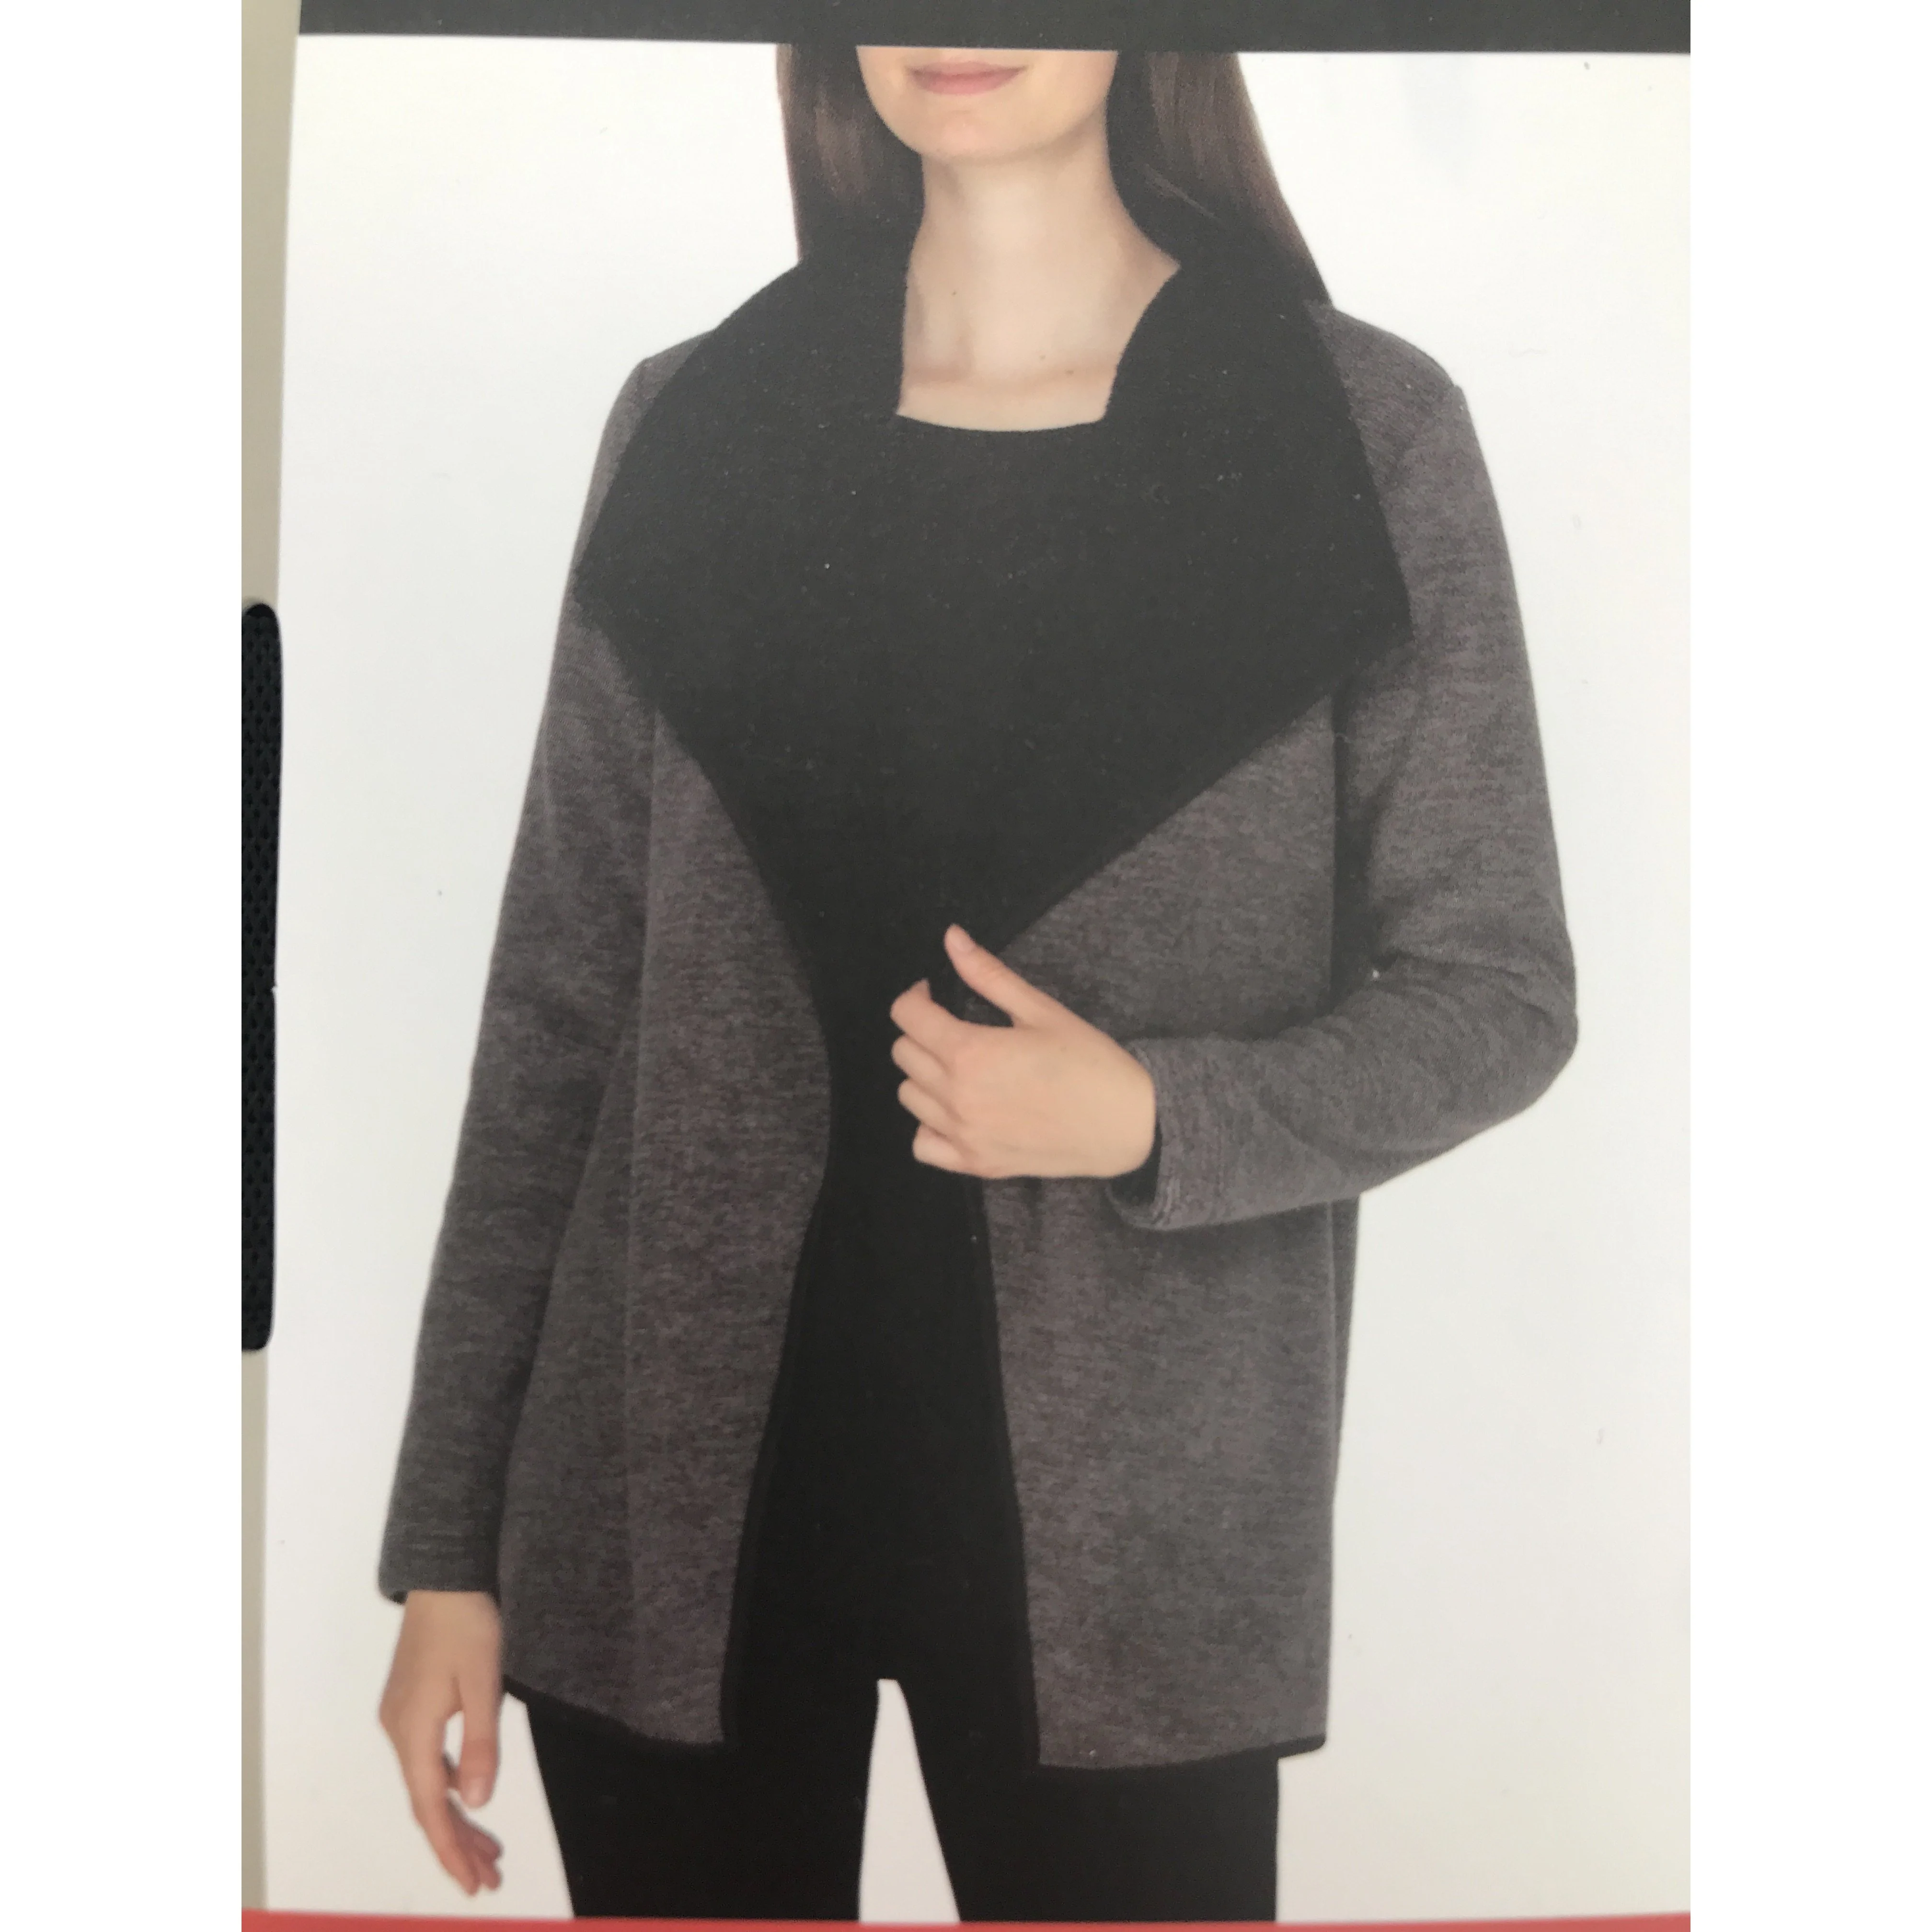 Nicole Miller Open Sweater  Colour: Purple  Composition: 100% Polyester   - Sherpa Lined ( Purple Sherpa is White)    - No button, or zipper secure at the front, open style   - Machine wash on cold gentle cycle  Condition note:  Brand new